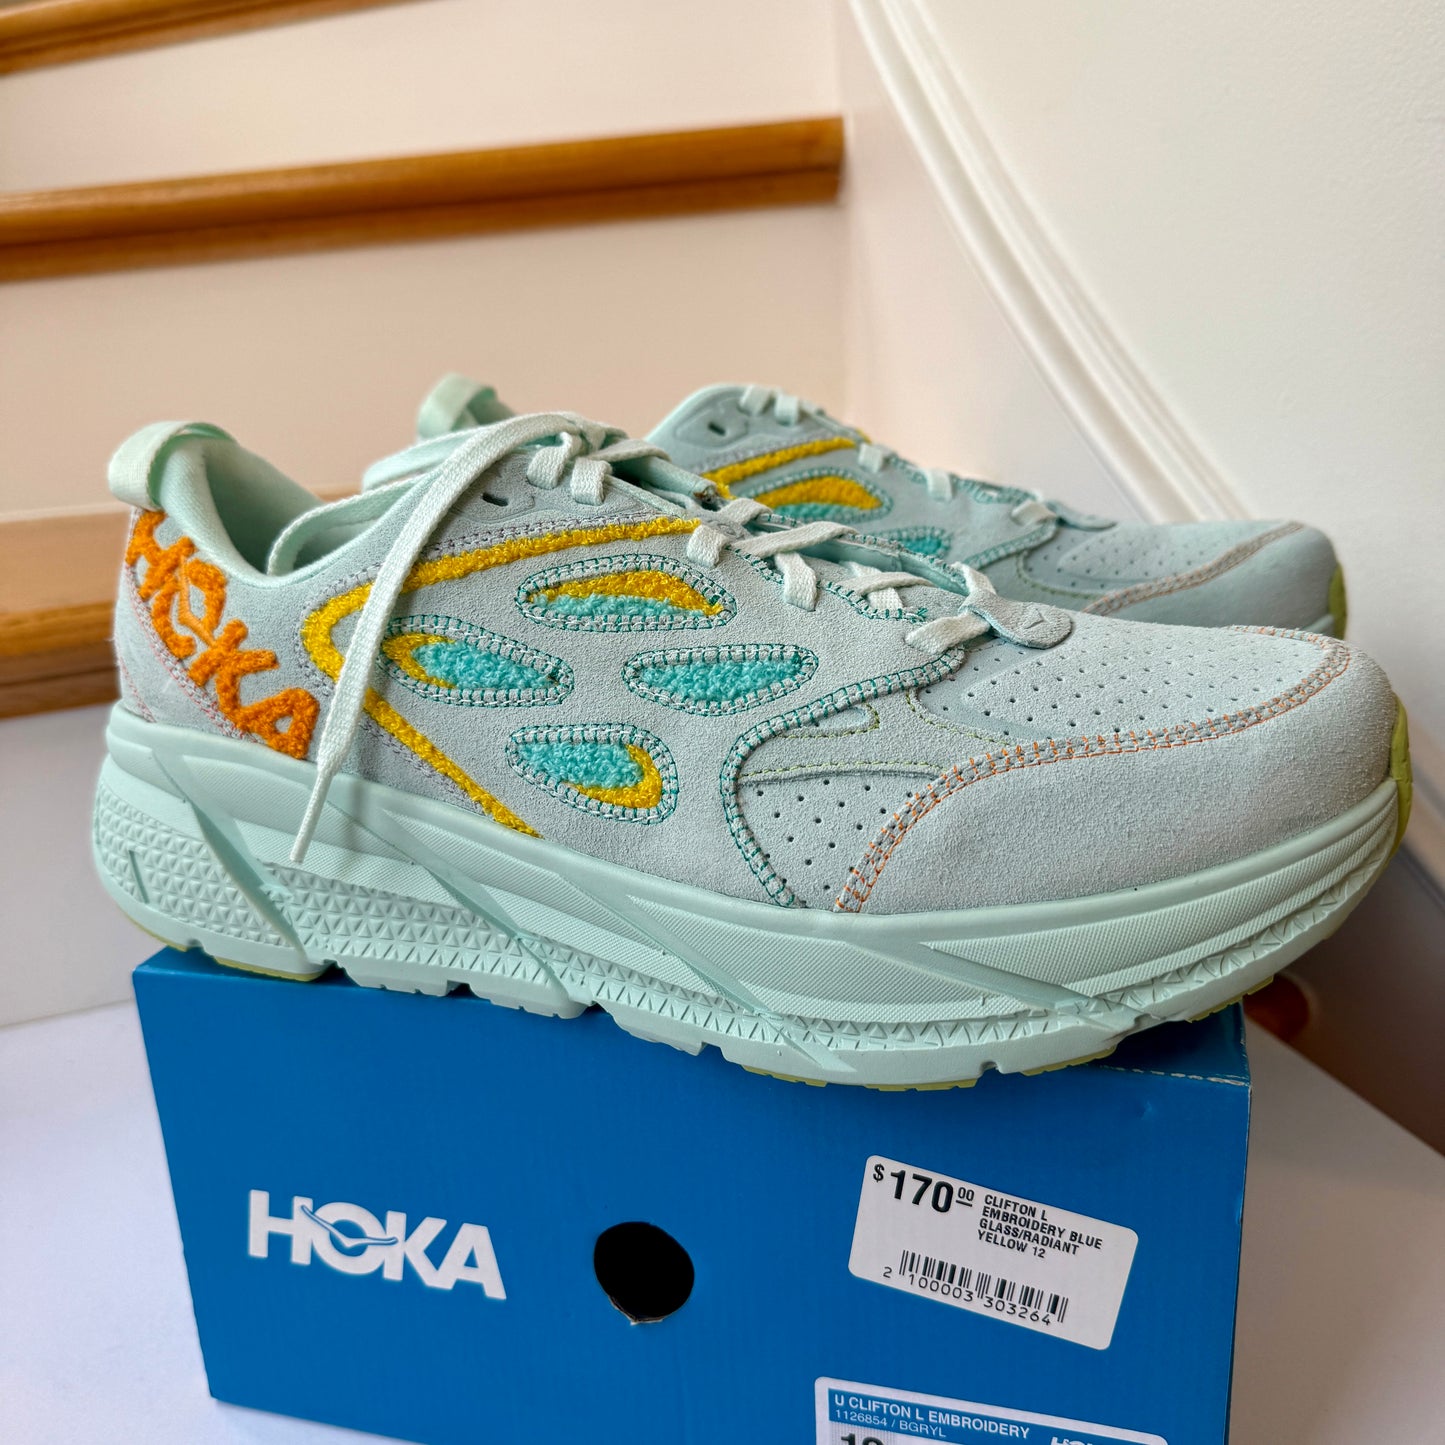 Hoka One One Clifton L Embroidery UNISEX Shoes Leather blue glass yellow